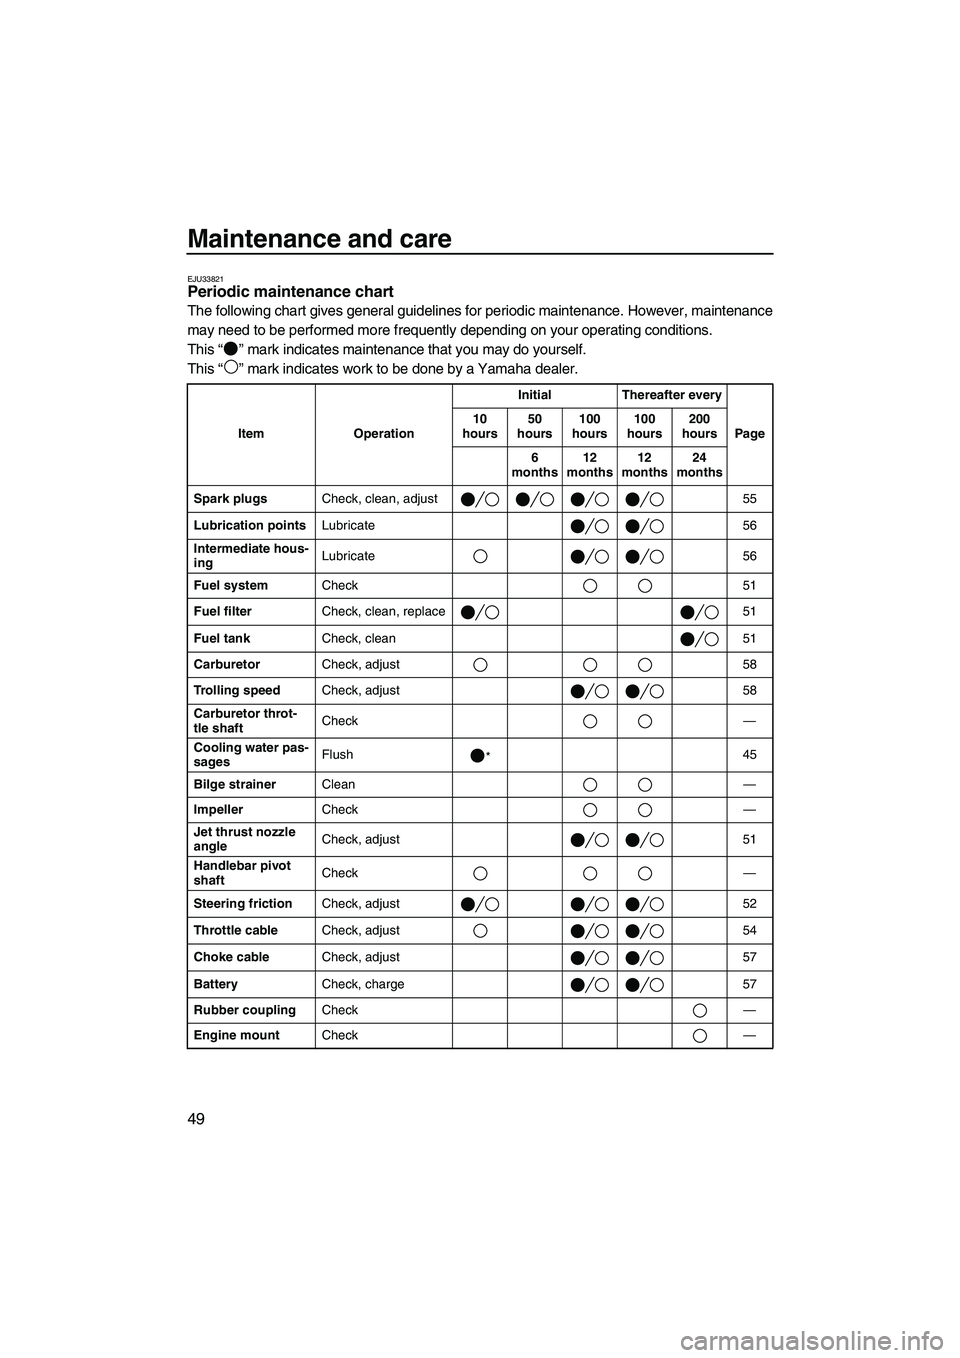 YAMAHA SUPERJET 2009  Owners Manual Maintenance and care
49
EJU33821Periodic maintenance chart 
The following chart gives general guidelines for periodic maintenance. However, maintenance
may need to be performed more frequently dependi